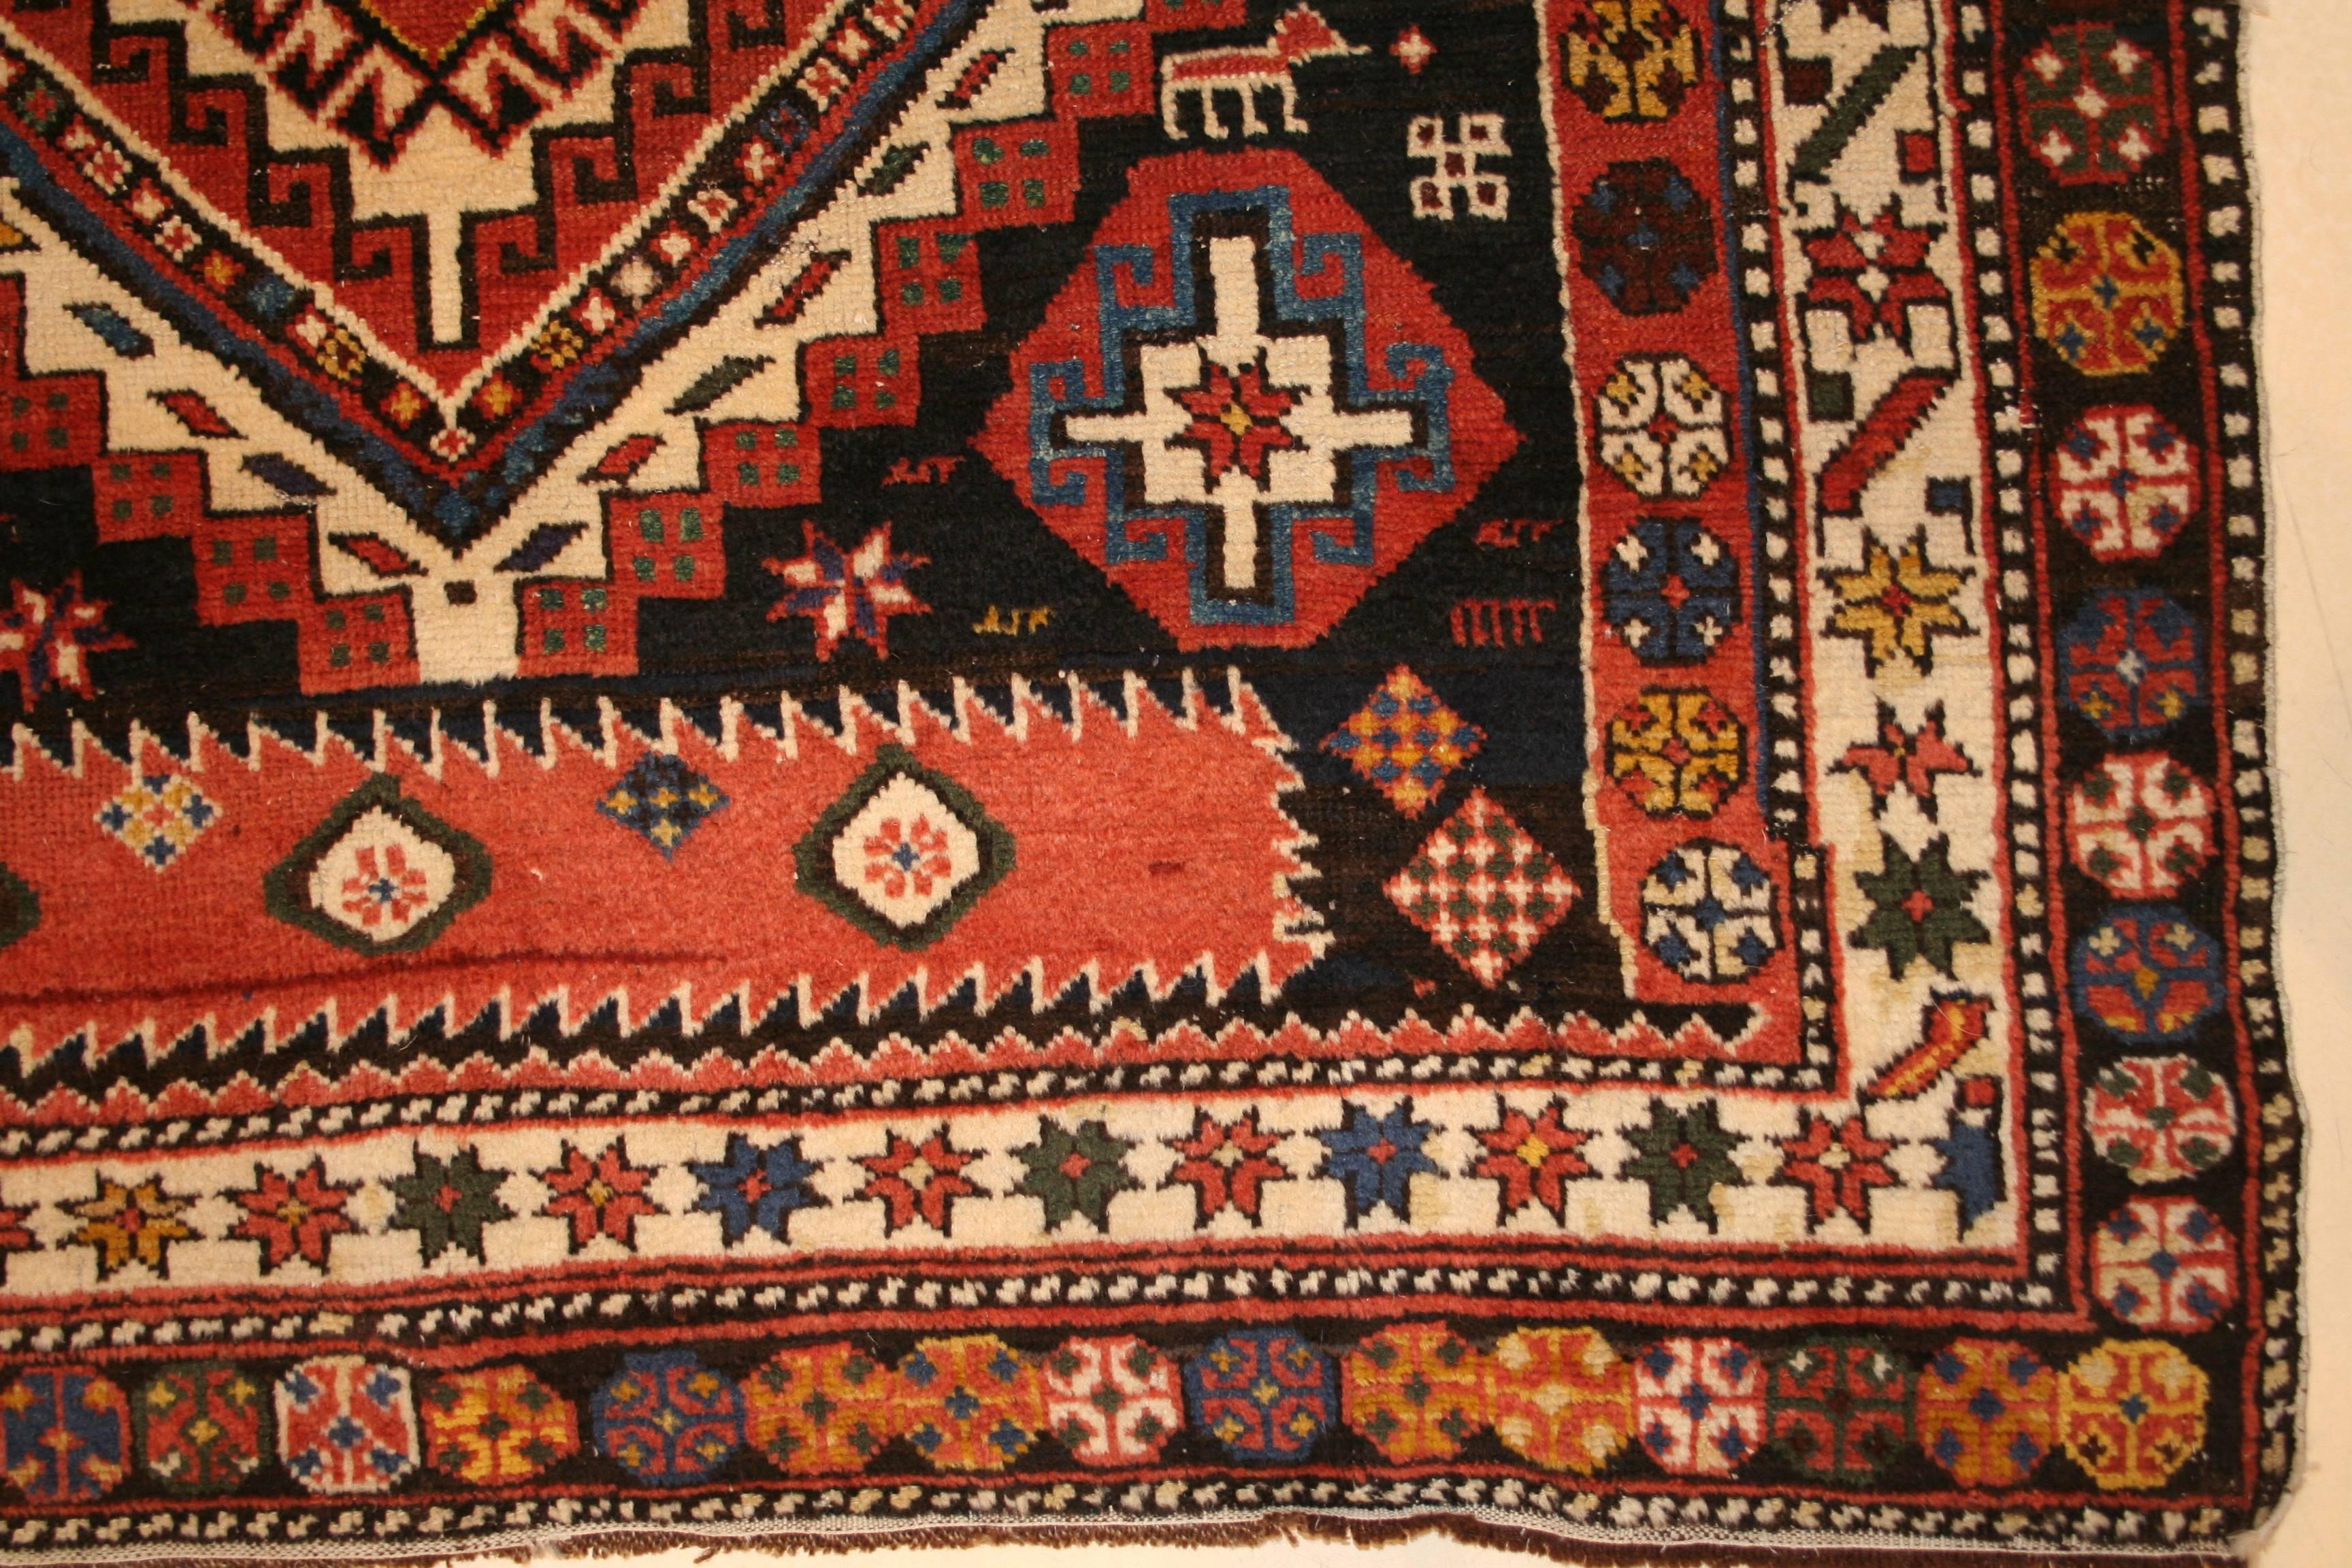 A rare antique Shirvan rug from the northeast Caucasus distinguished by a relatively large size. Caucasian rugs of this type are very finely woven and characterized by geometric patterns. The typical format for this family of rugs is either quite